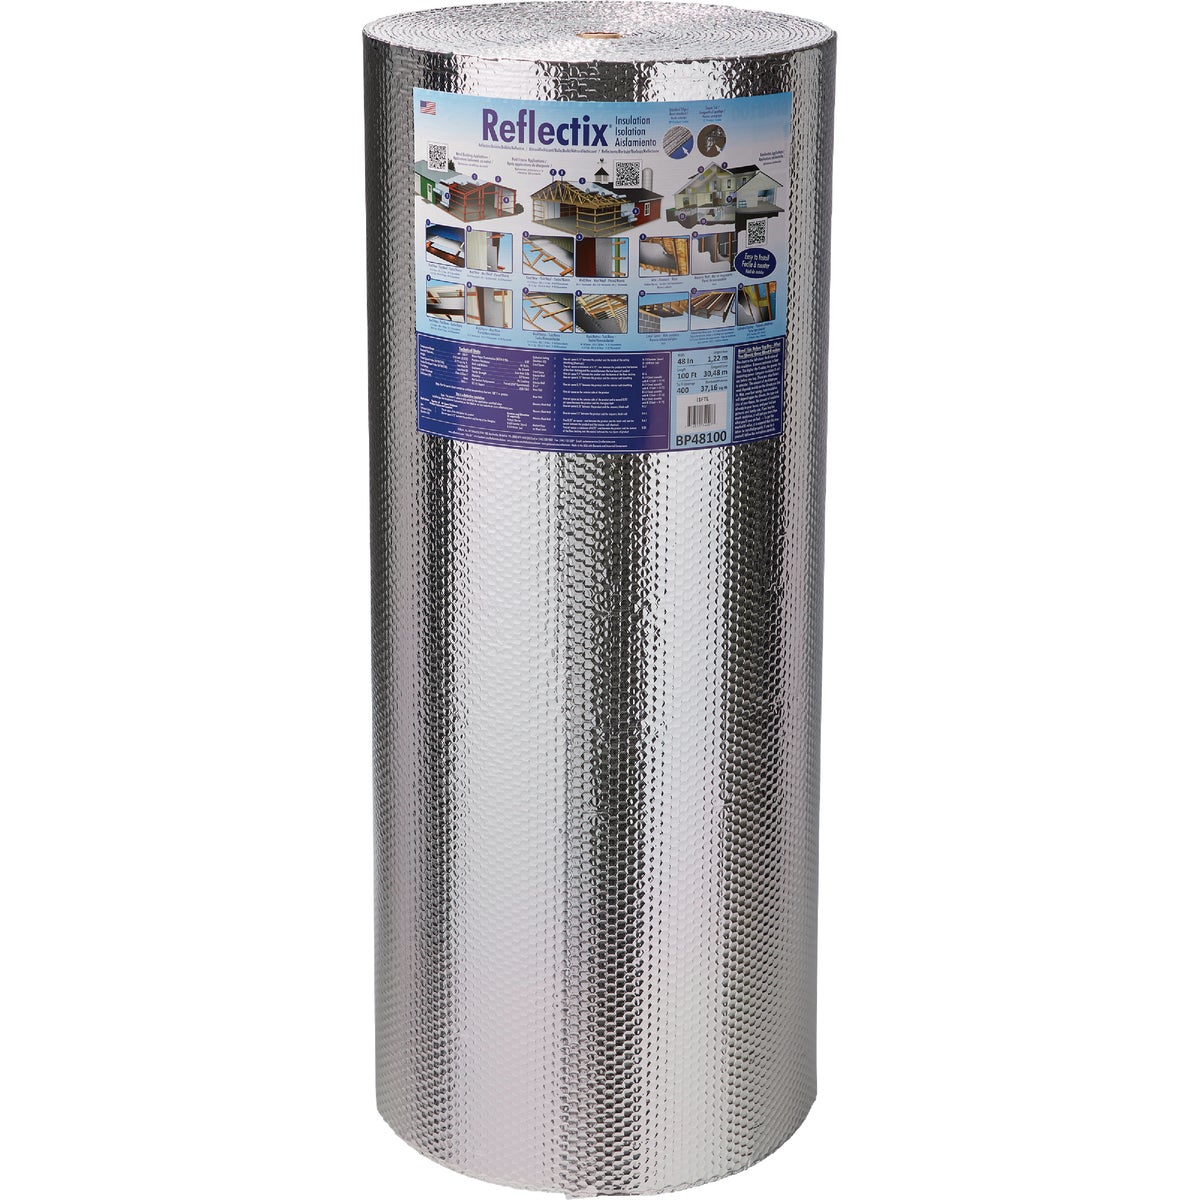 Reflectix 48 In. x 100 Ft. Double Reflective Insulation